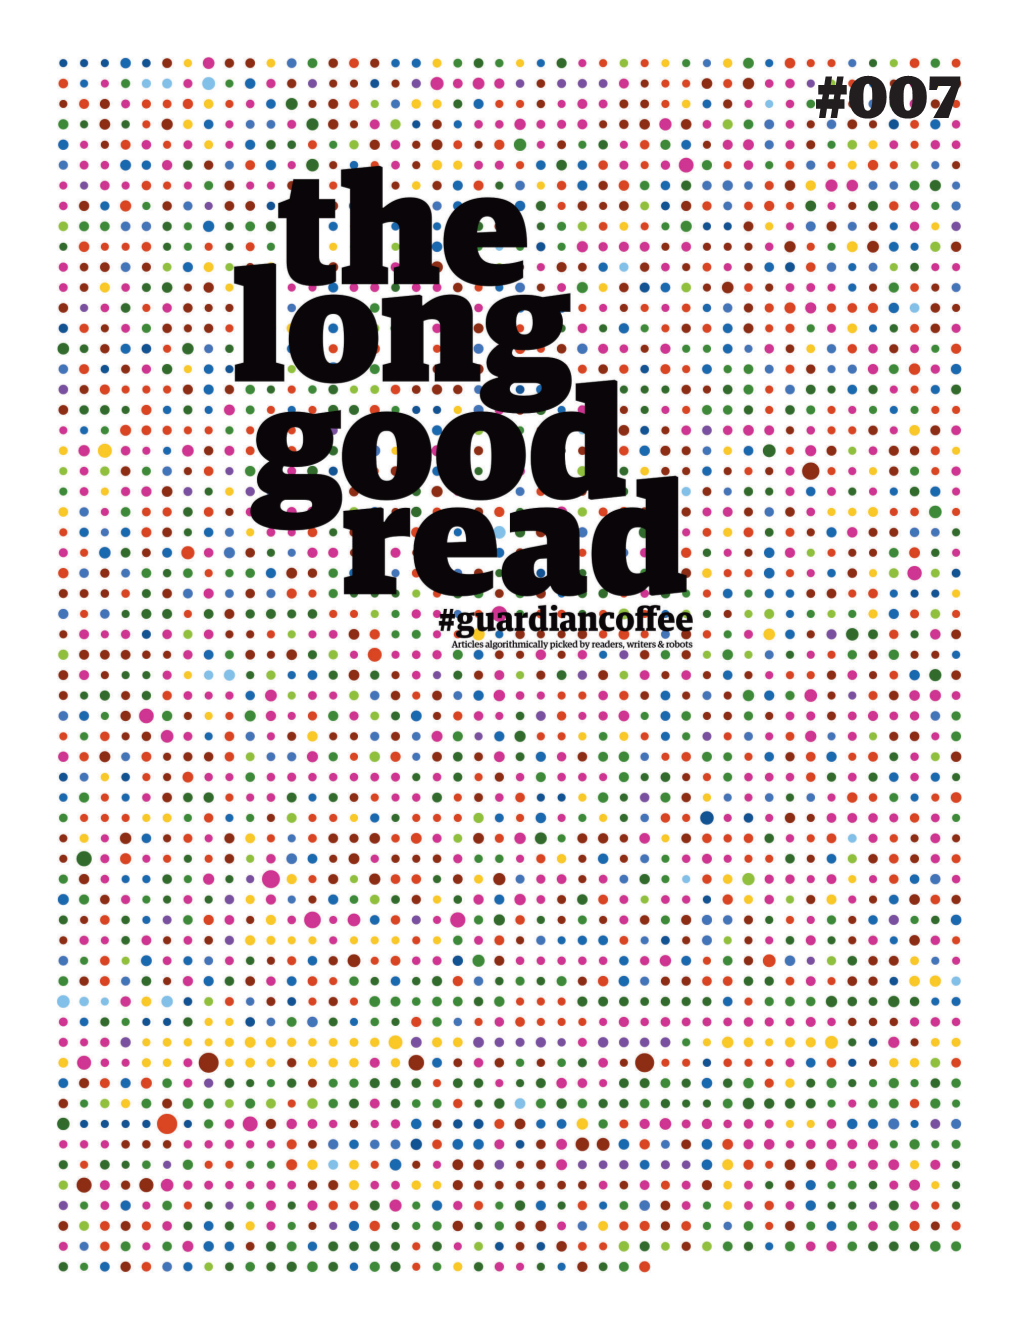 007 2 the Long Good Read #Guardiancoﬀee007